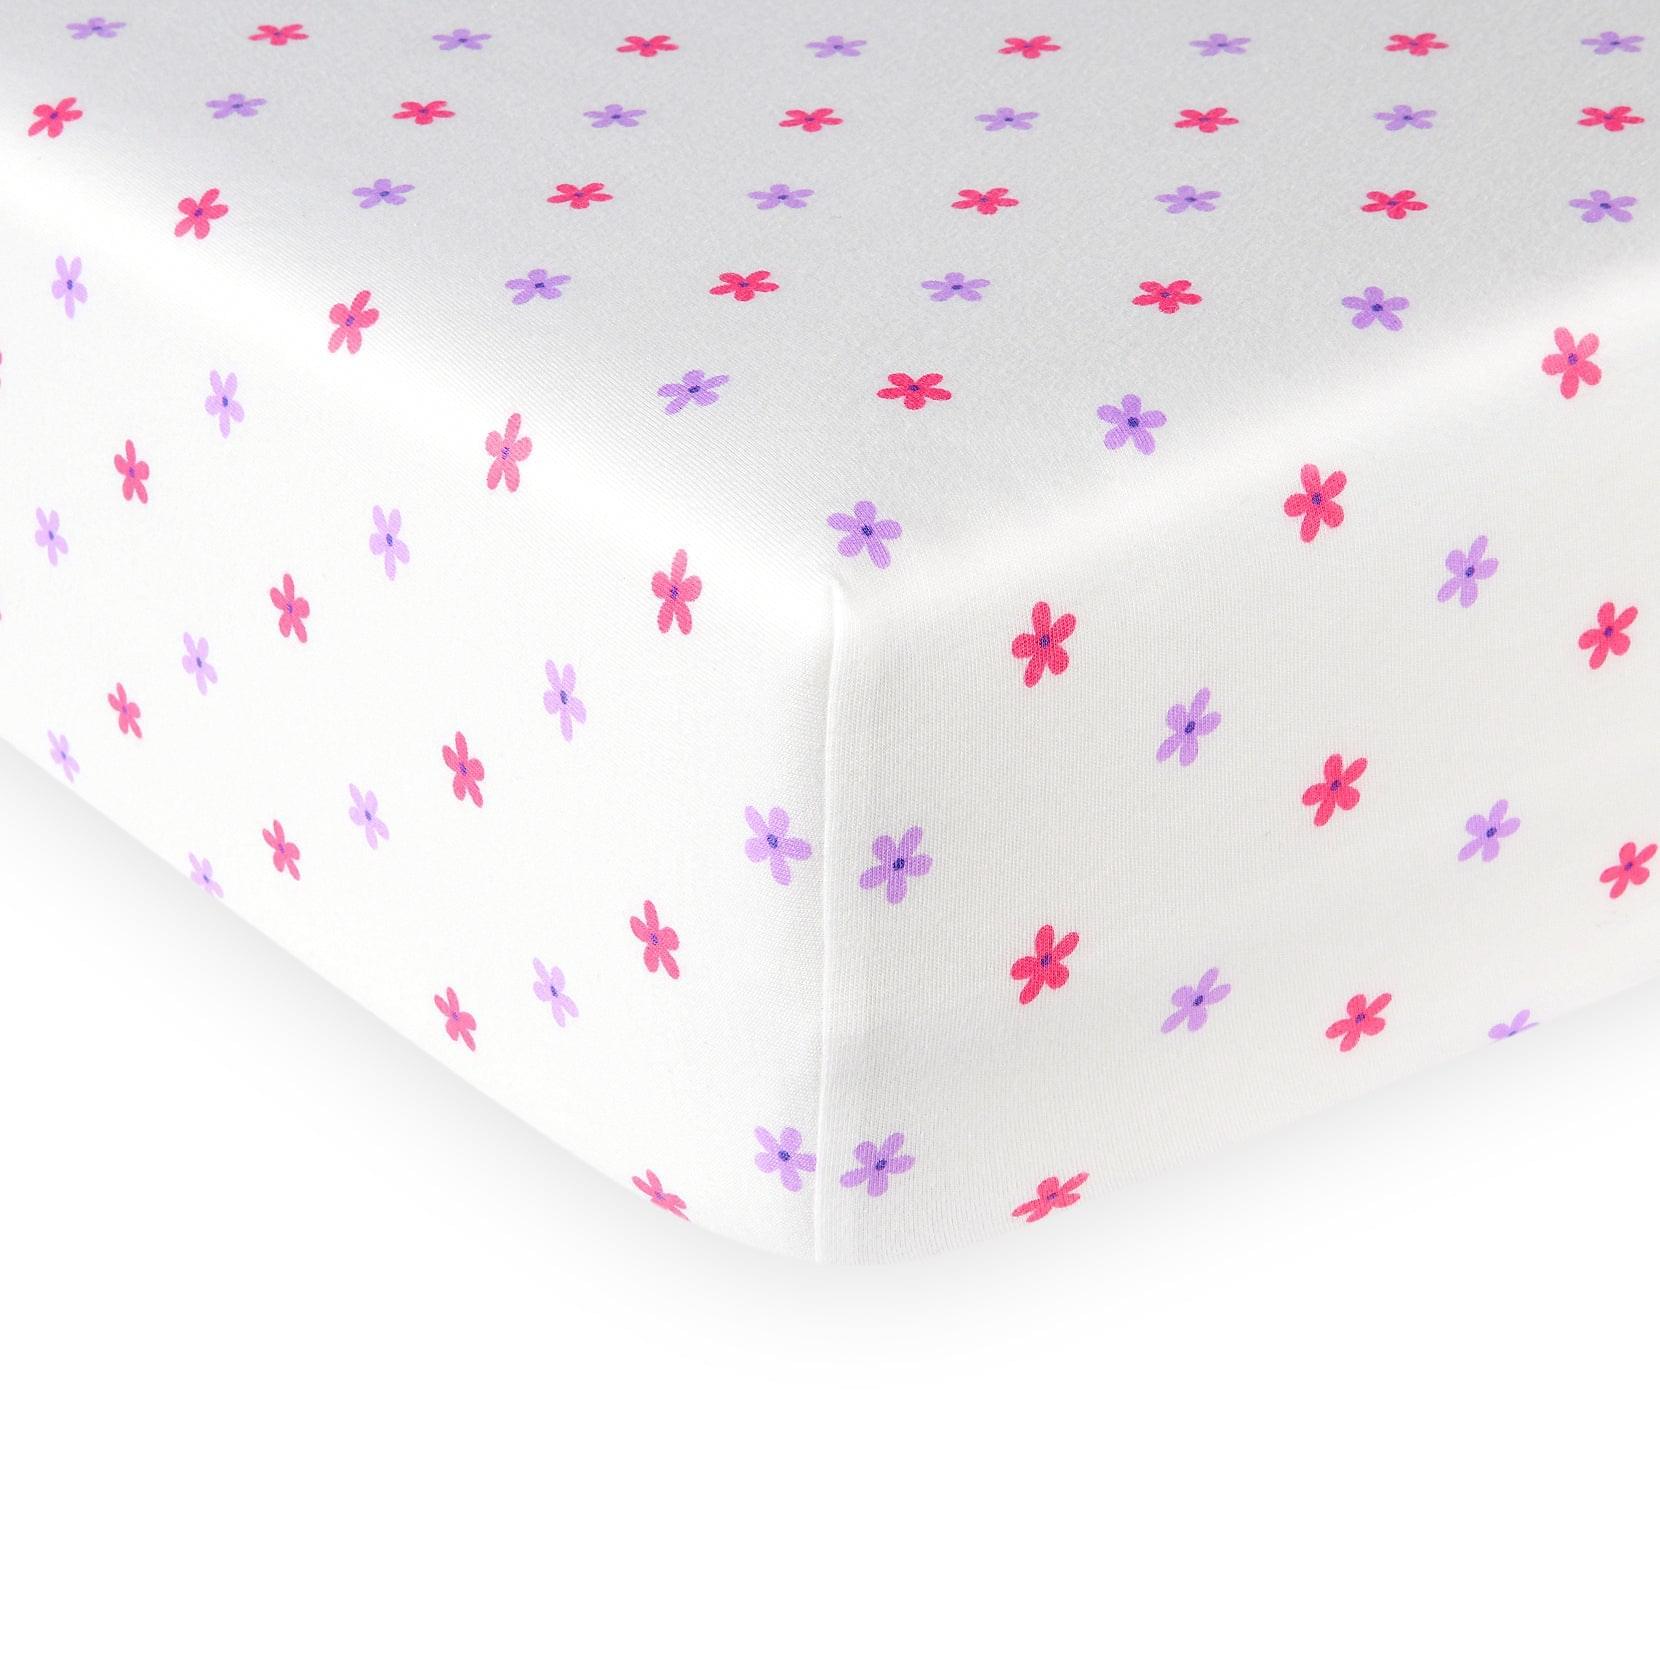 Babelio Fitted Crib Sheets for Standard Crib & Toldder Mattress, 100% Cotton, 52 x 28 x 8 inches (Pack of 1) - Floral - babeliobaby